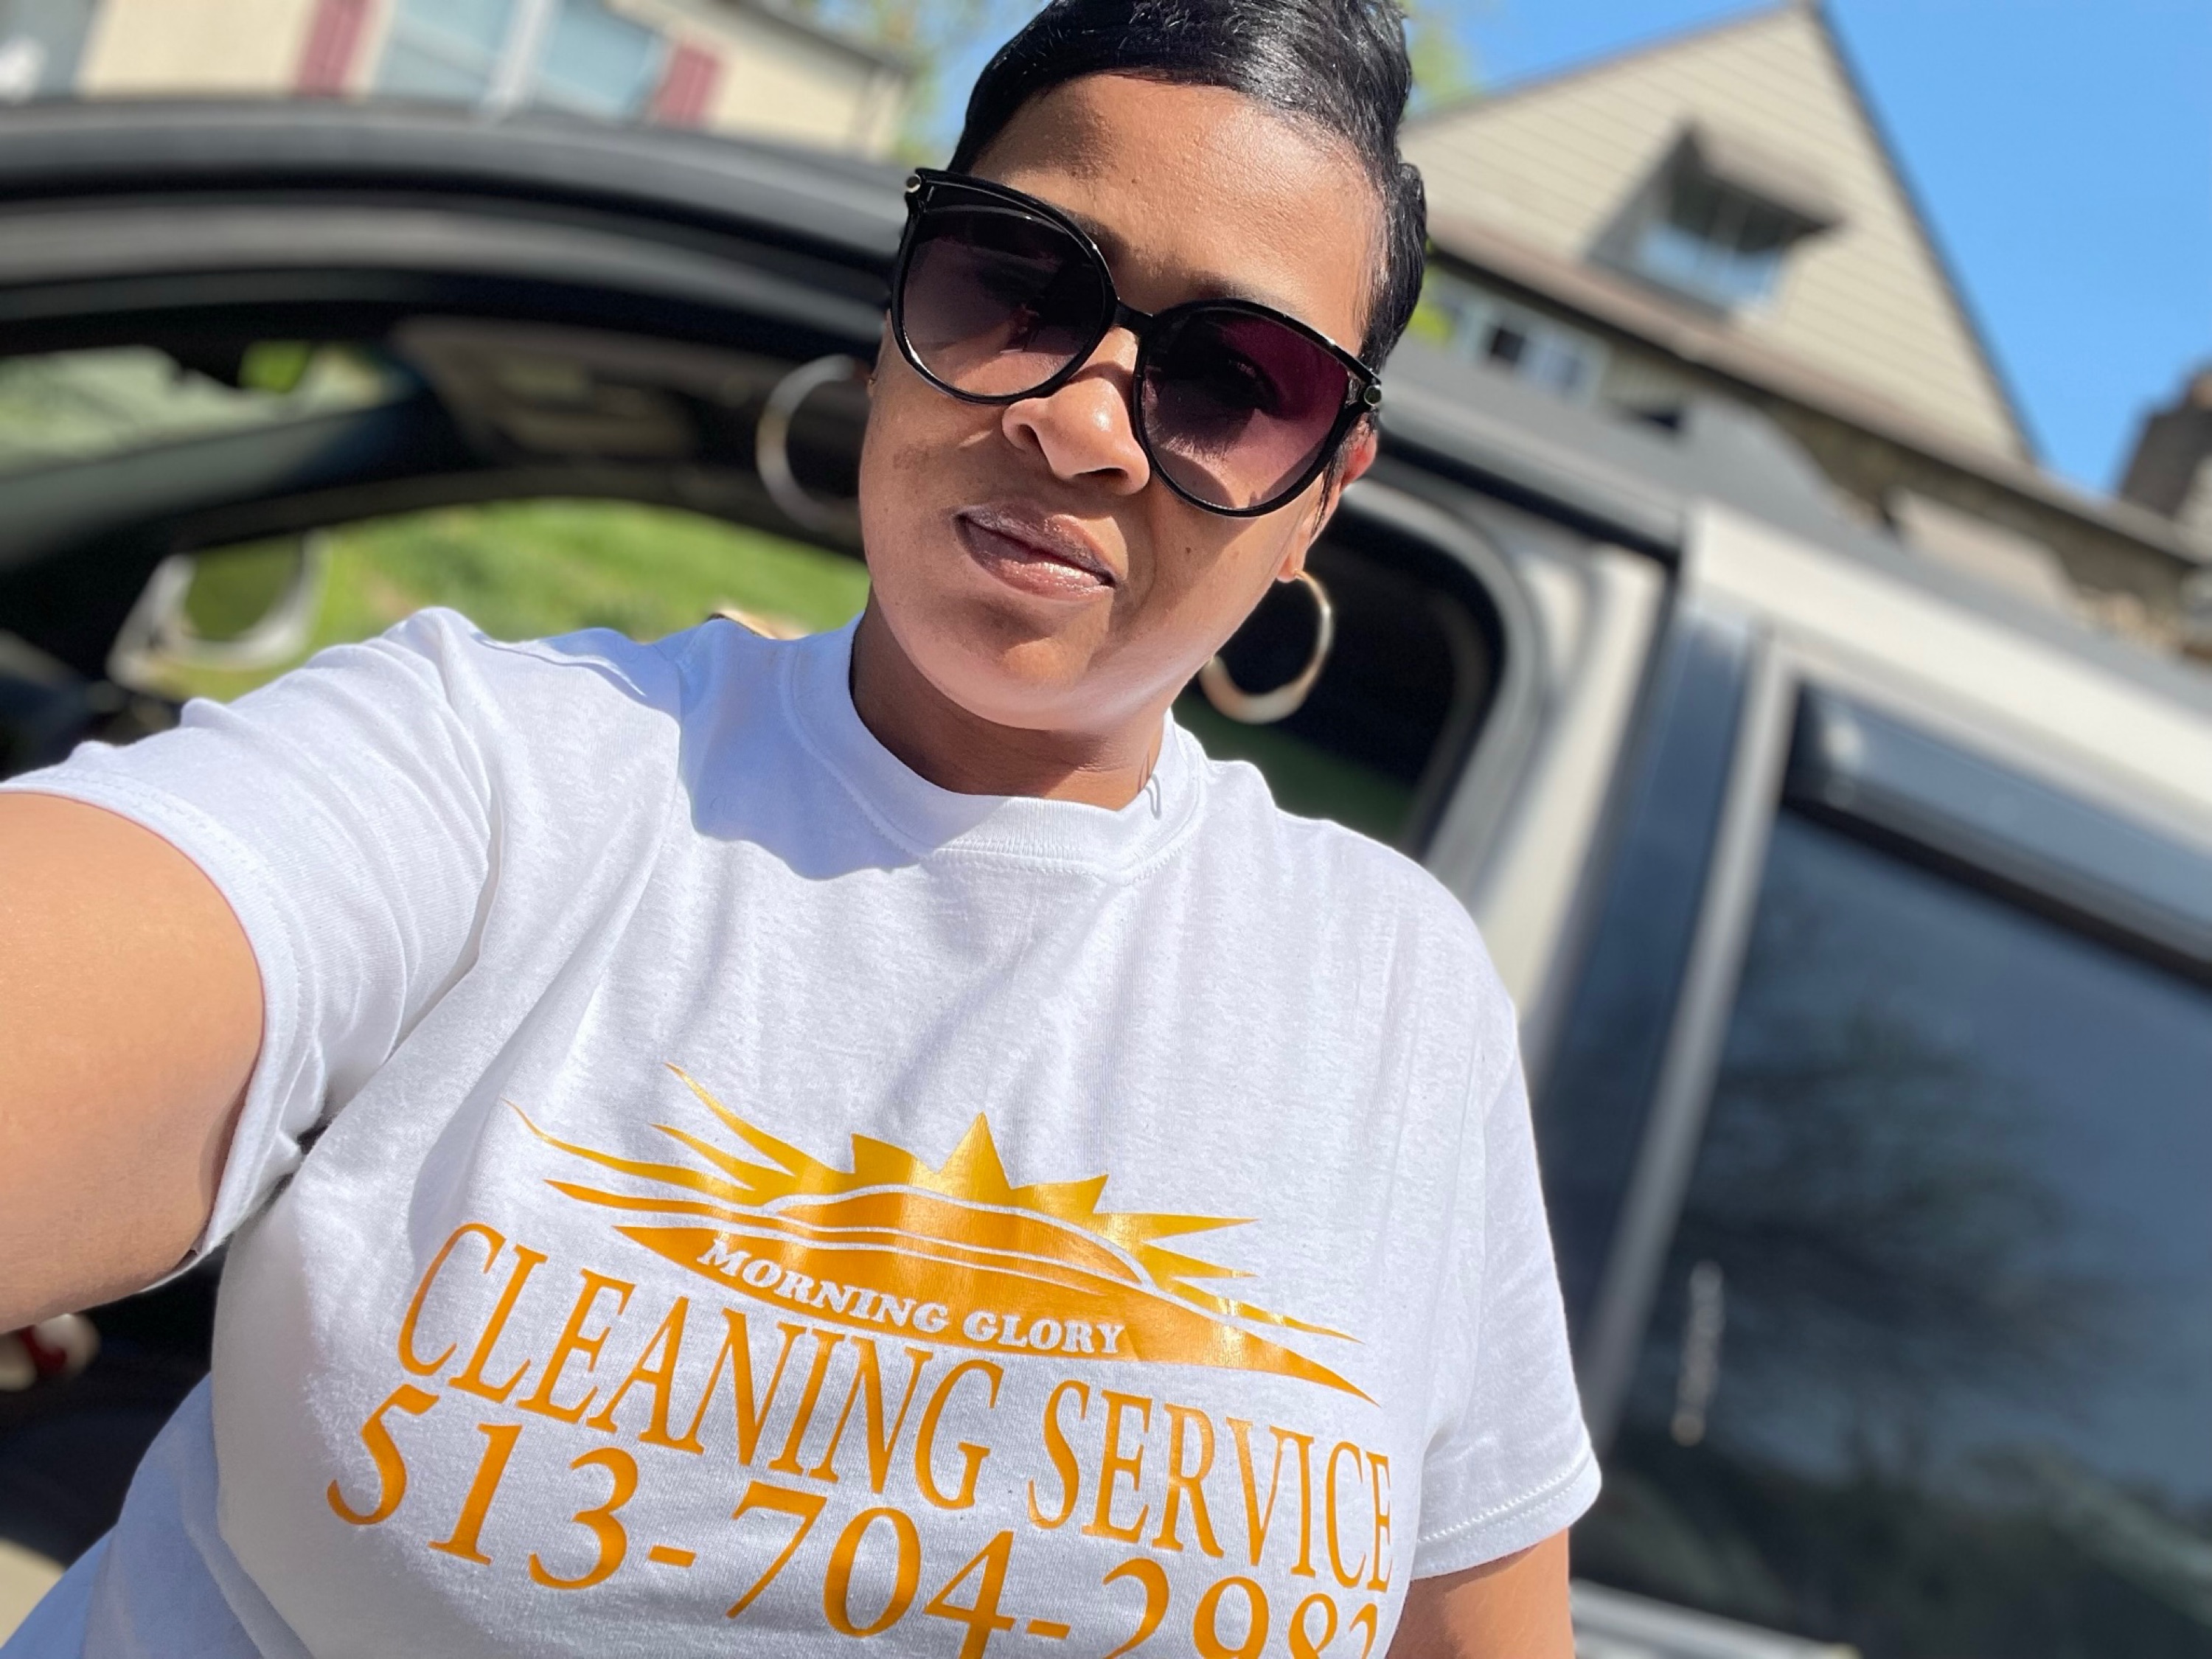 Morning Glory Cleaning Services LLC Logo